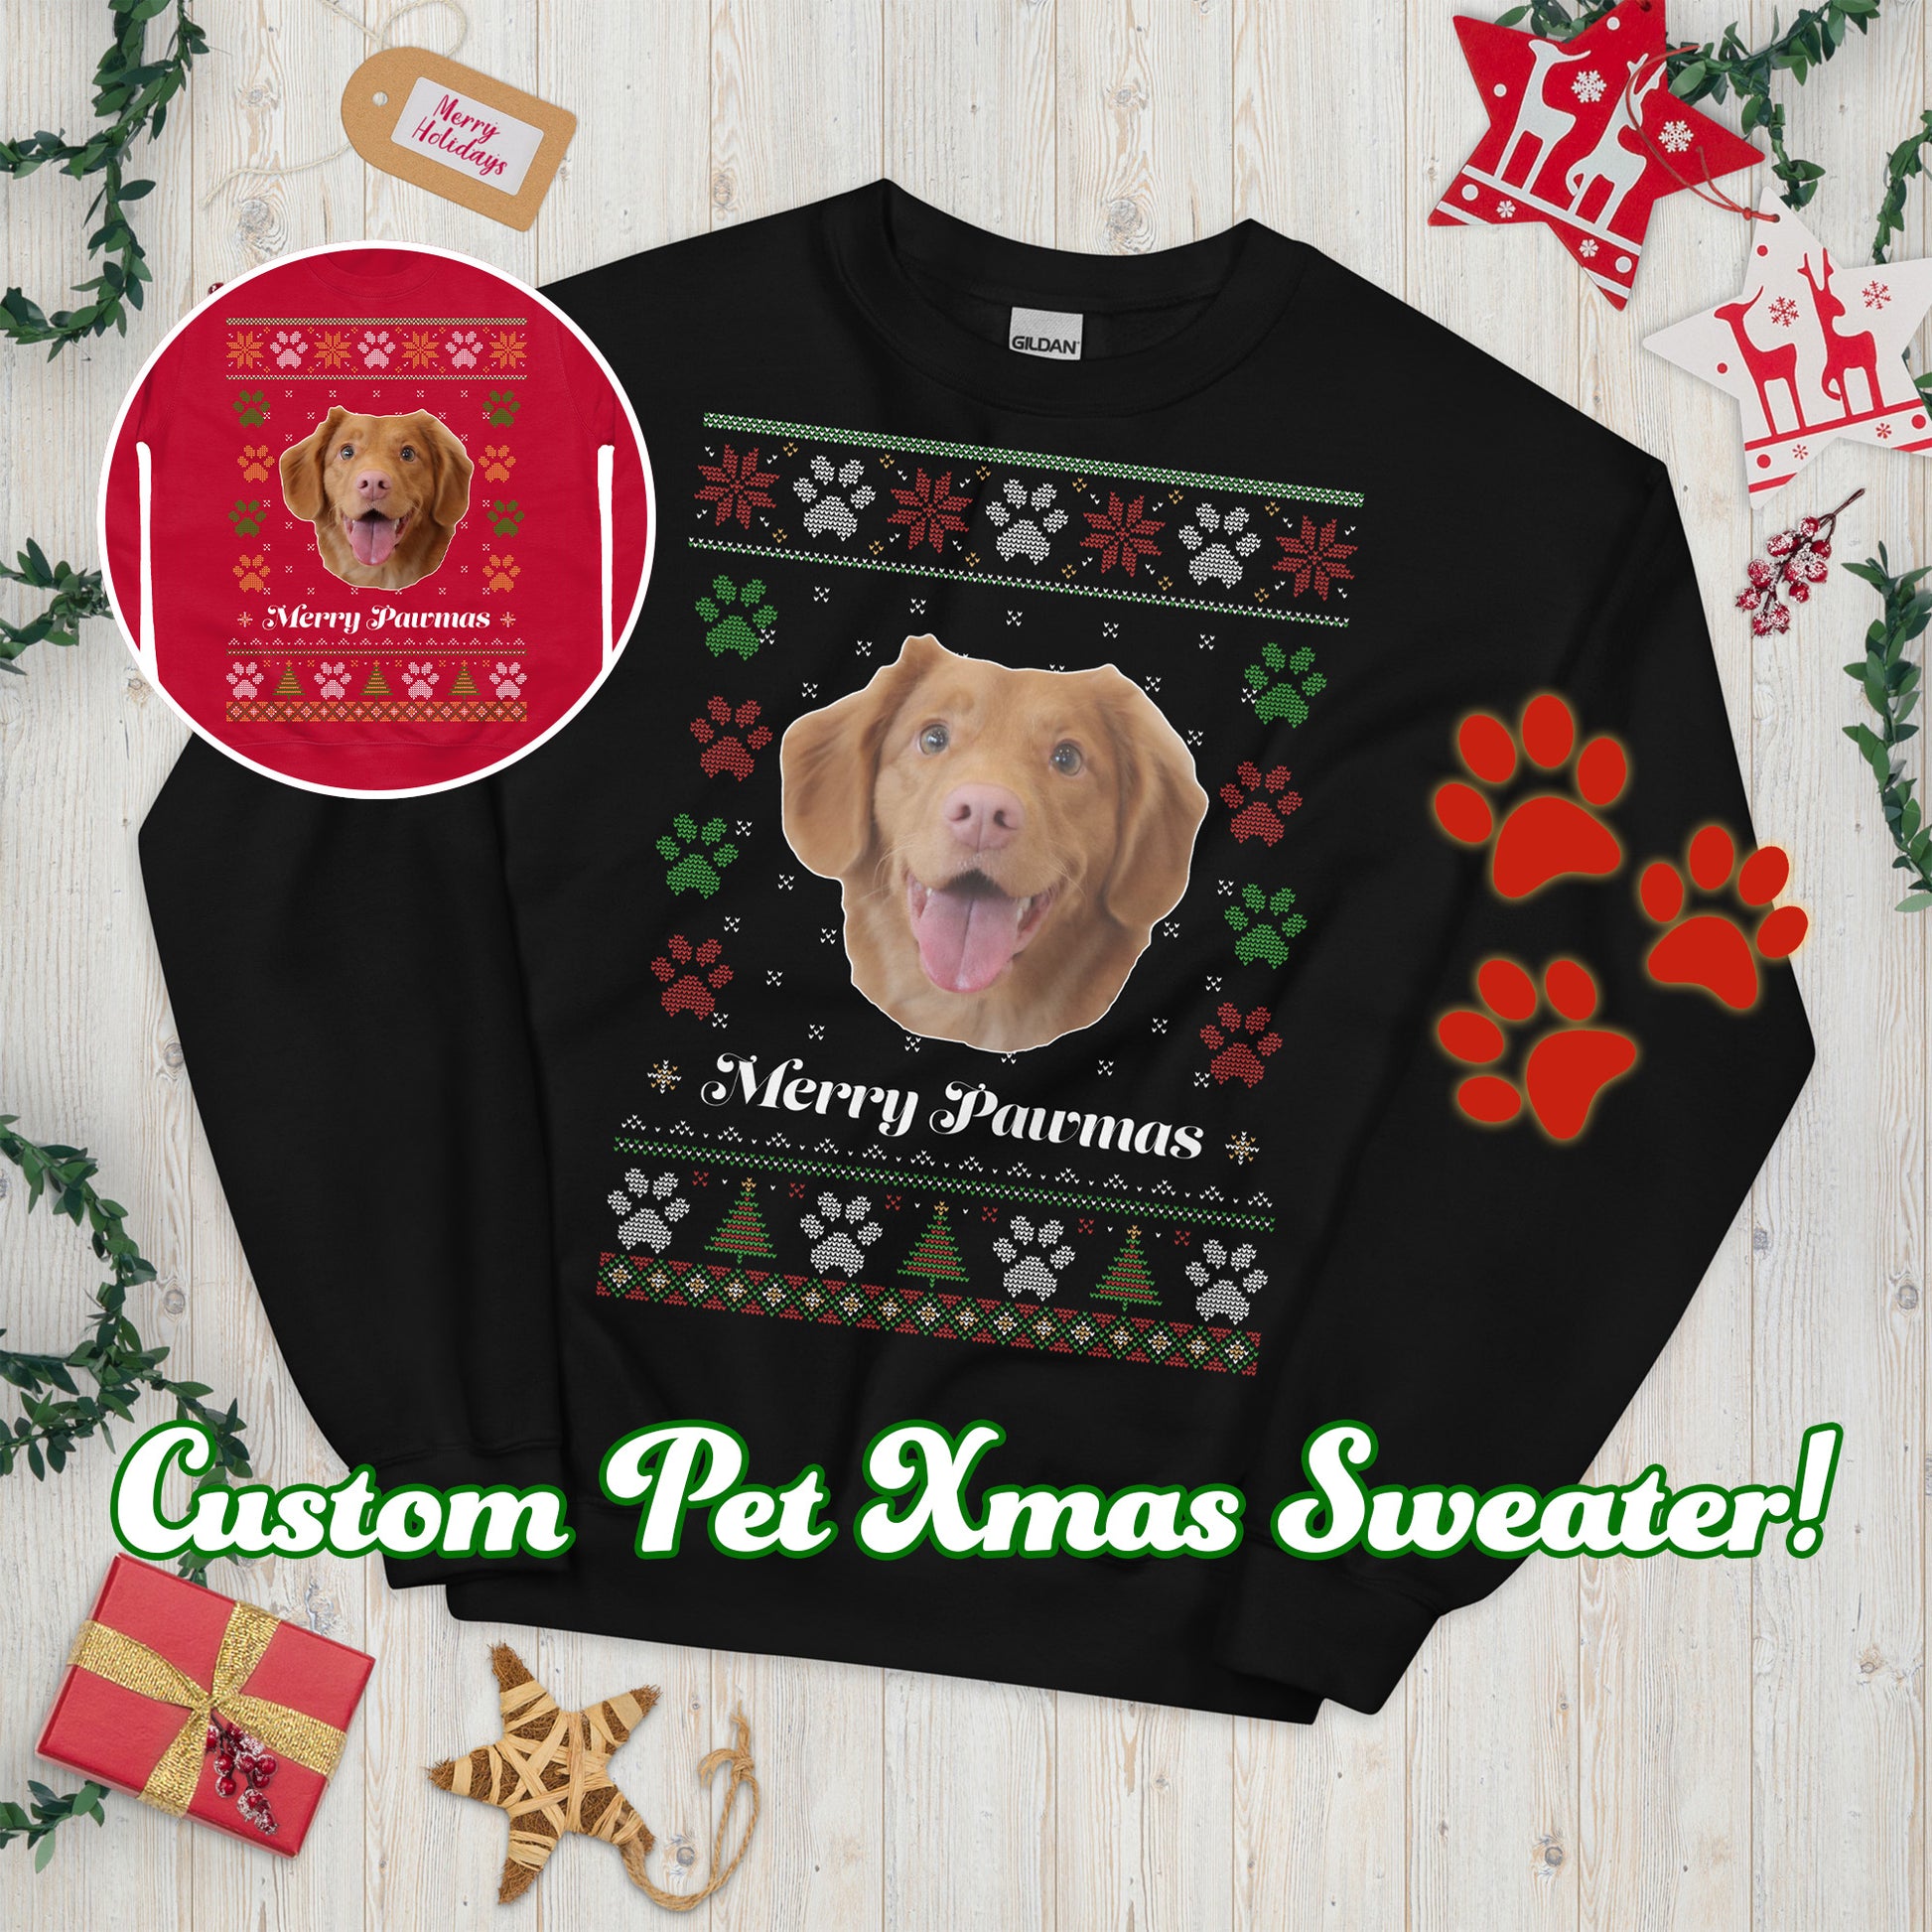 Custom Personalised Christmas Sweatshirt Ugly Sweater Unisex Xmas Gift with Pet Image and 'Merry Pawmas' text